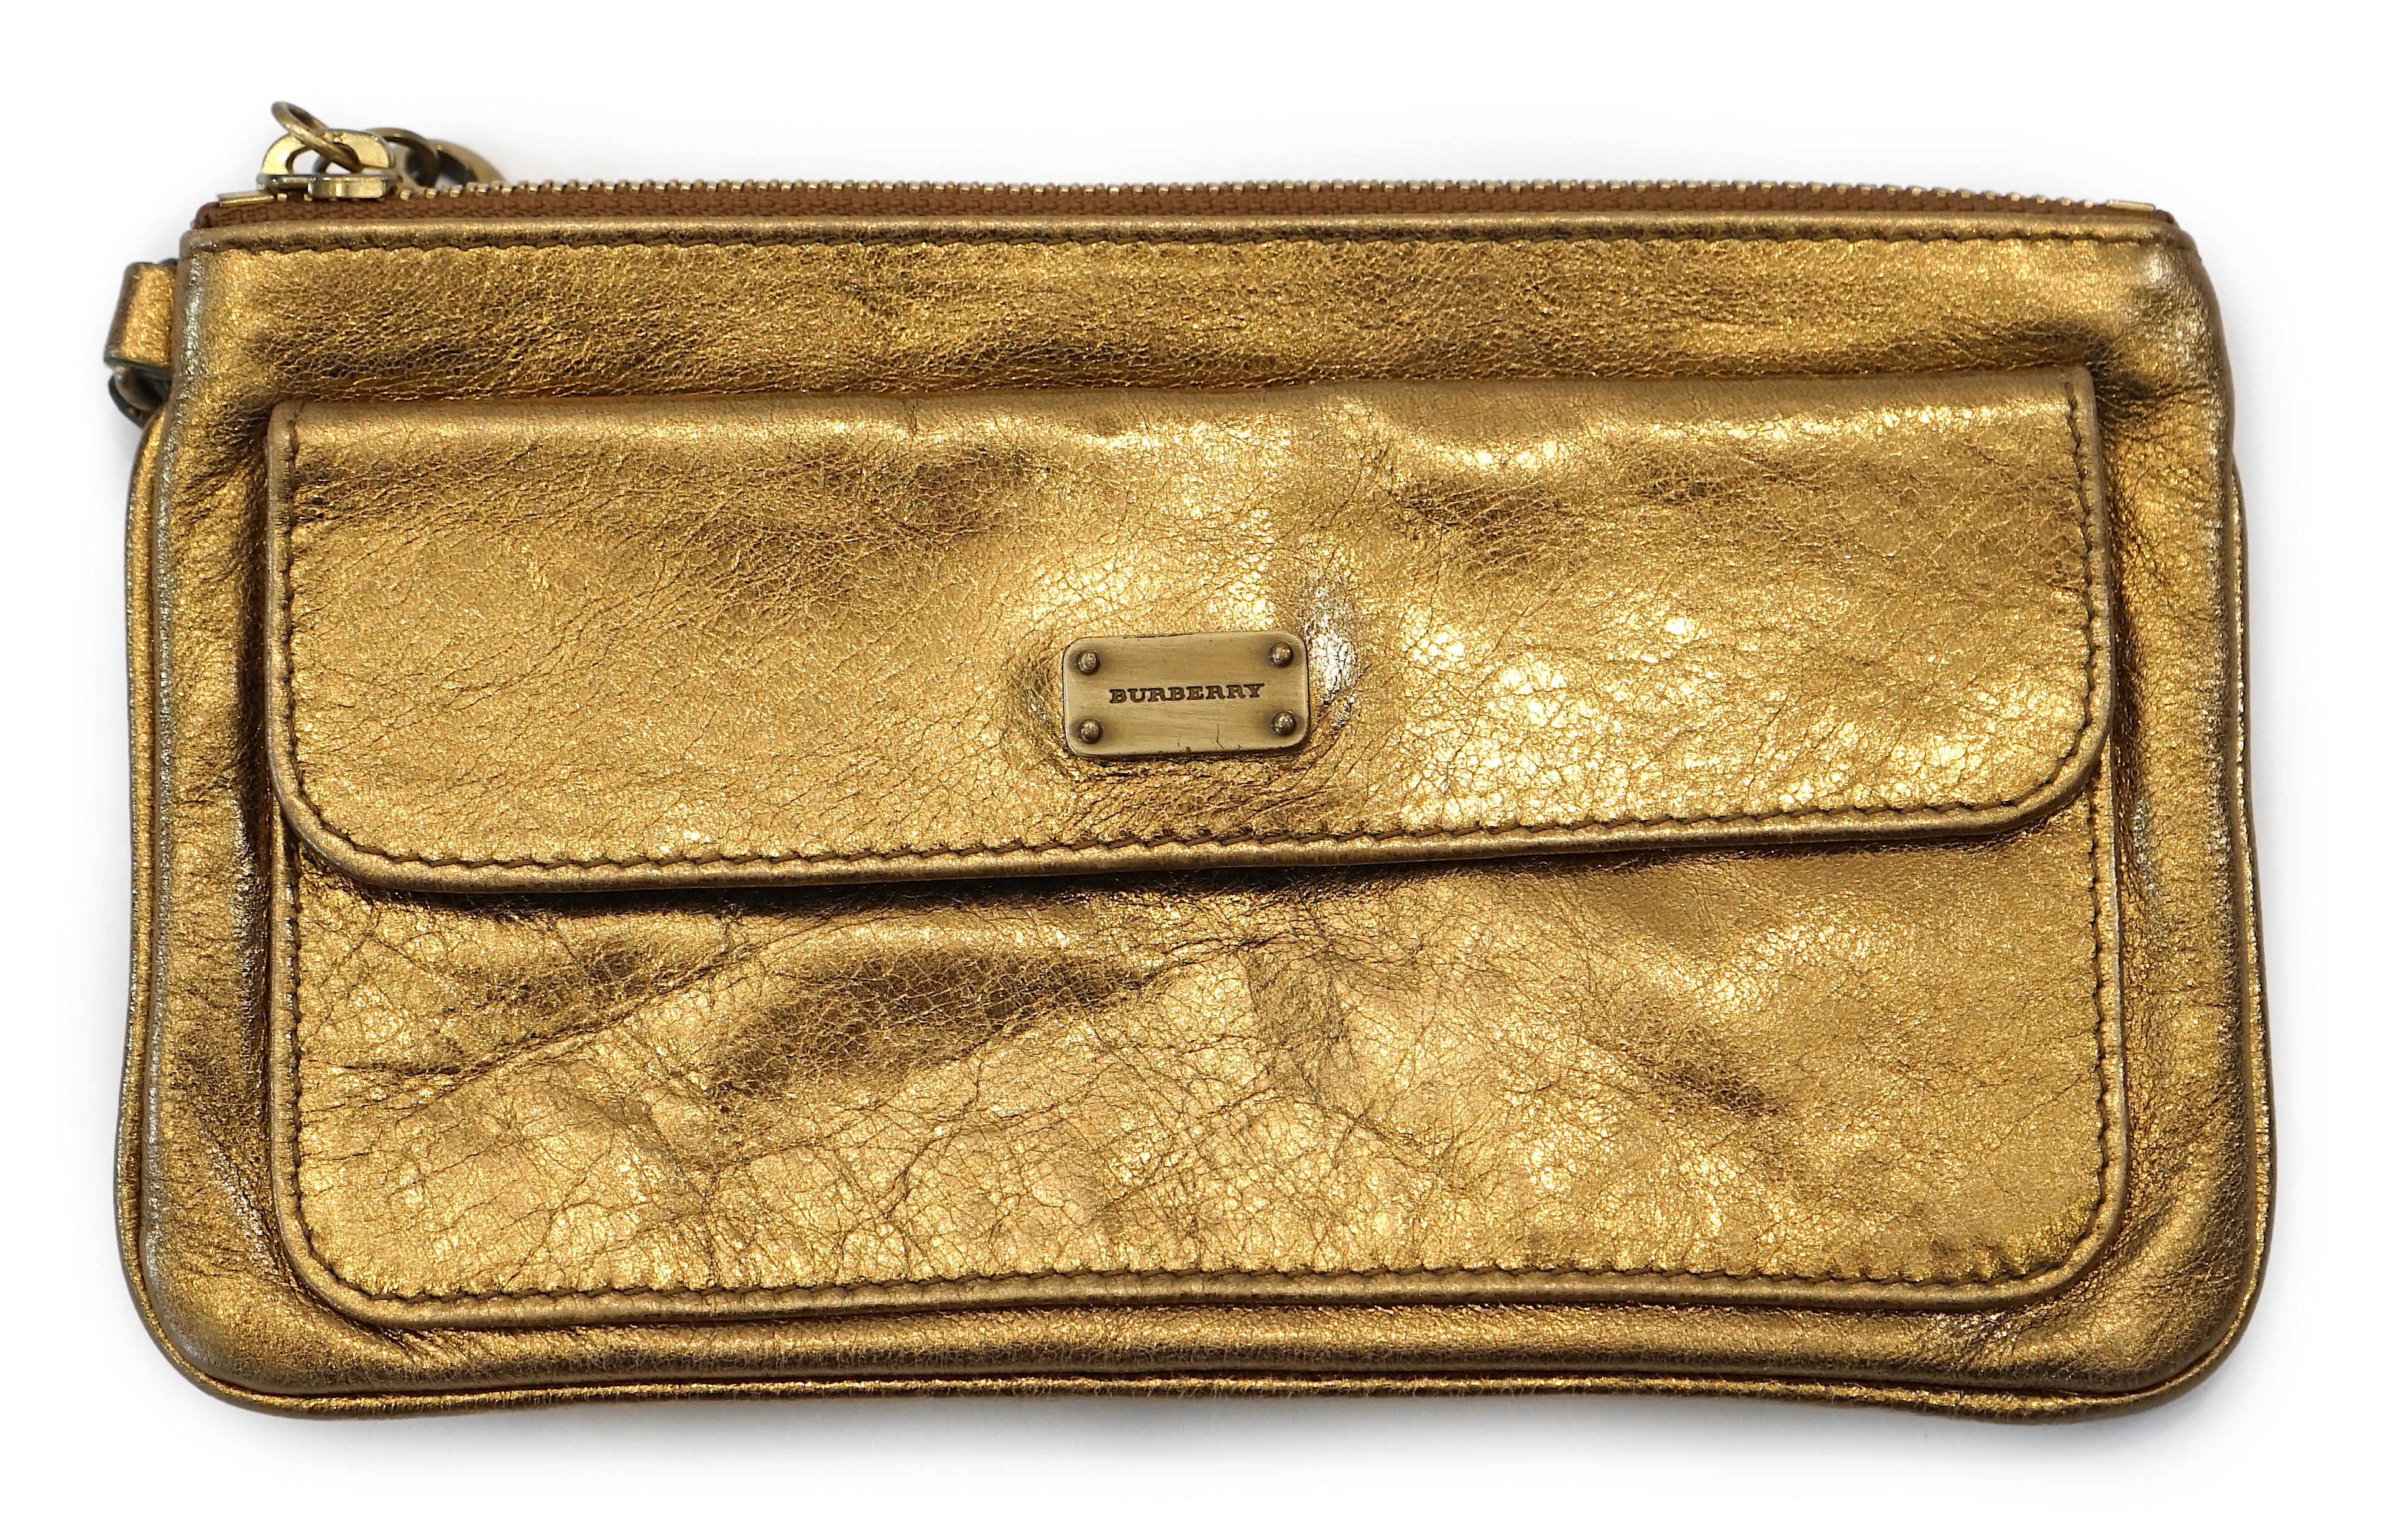 A Burberry gold leather clutch bag with original dust bag, approx length 19.5cm, height 11cm